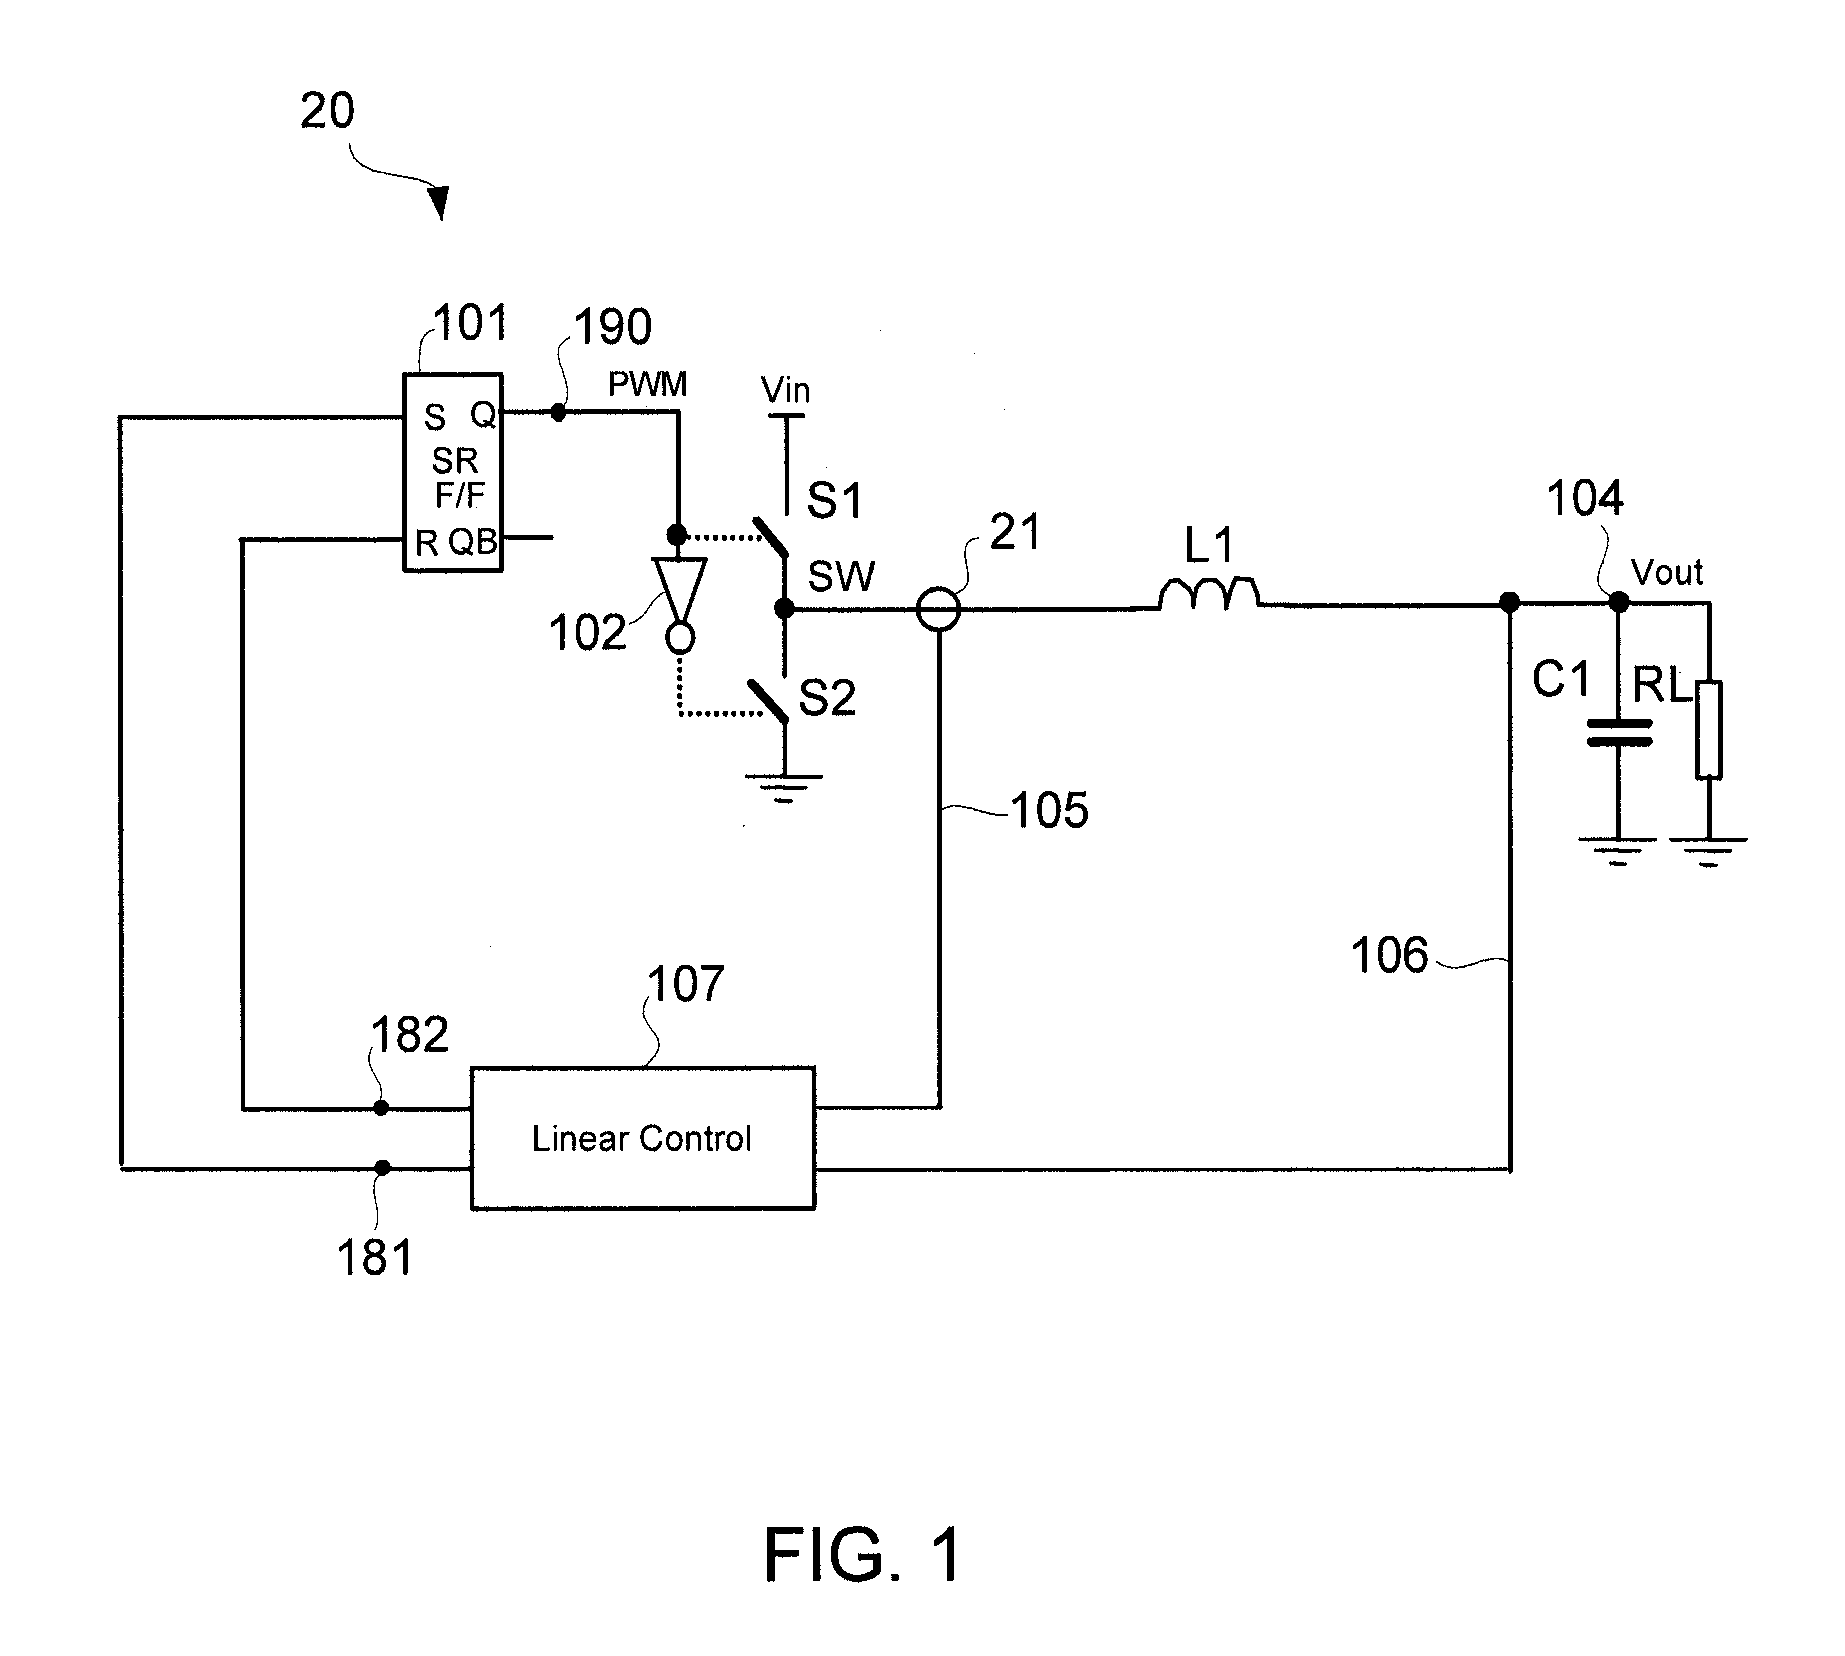 Voltage regulator with current-mode dual-edge pulse width modulation and non-linear control